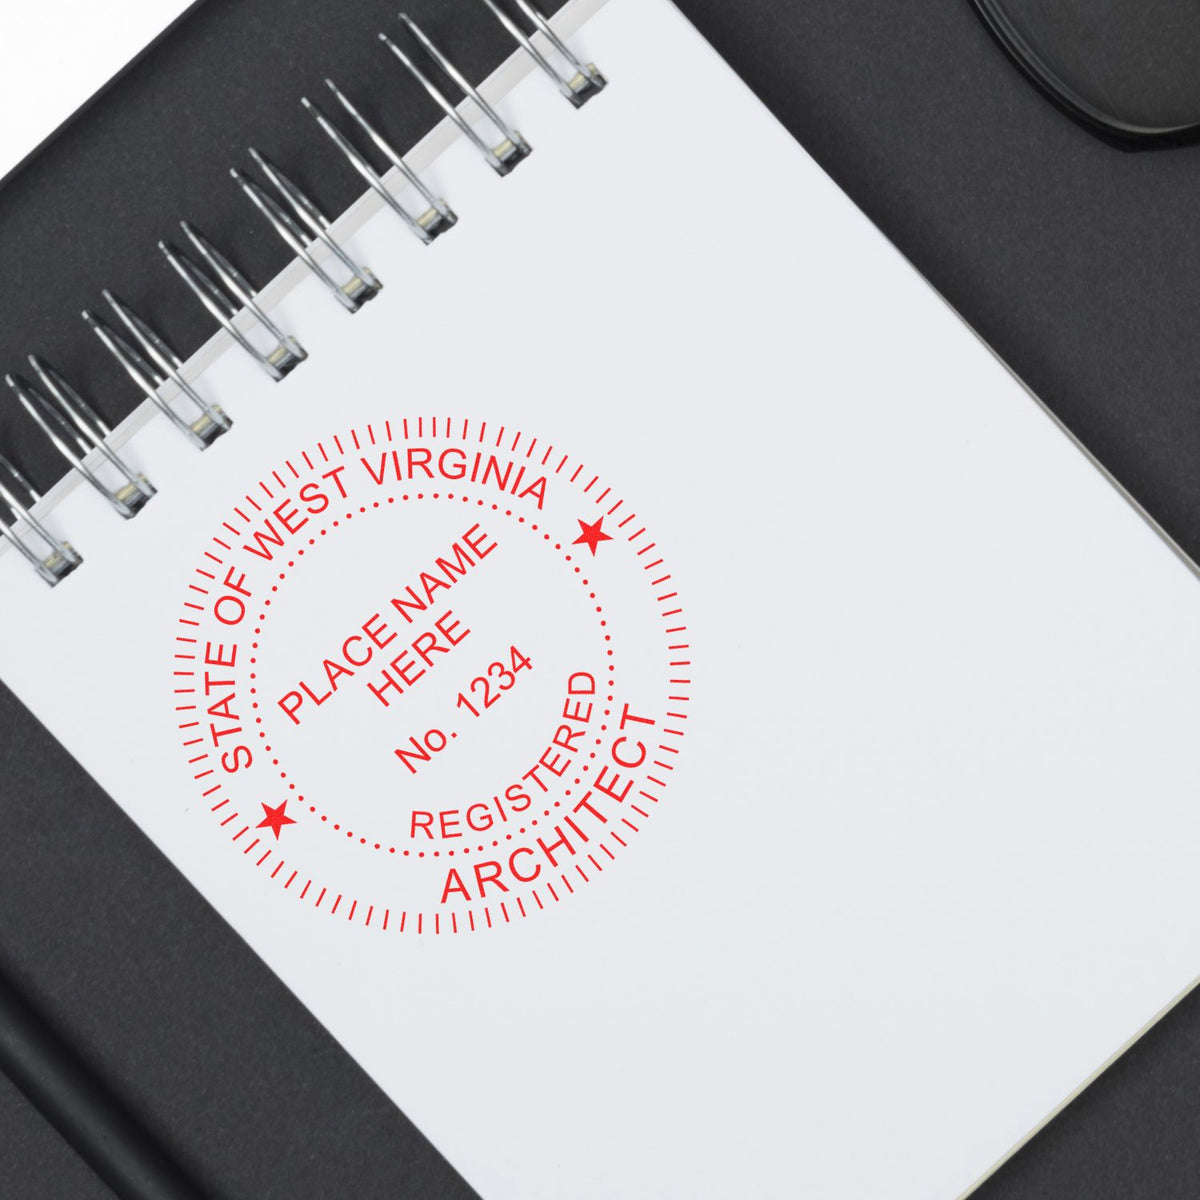 The Slim Pre-Inked West Virginia Architect Seal Stamp stamp impression comes to life with a crisp, detailed photo on paper - showcasing true professional quality.